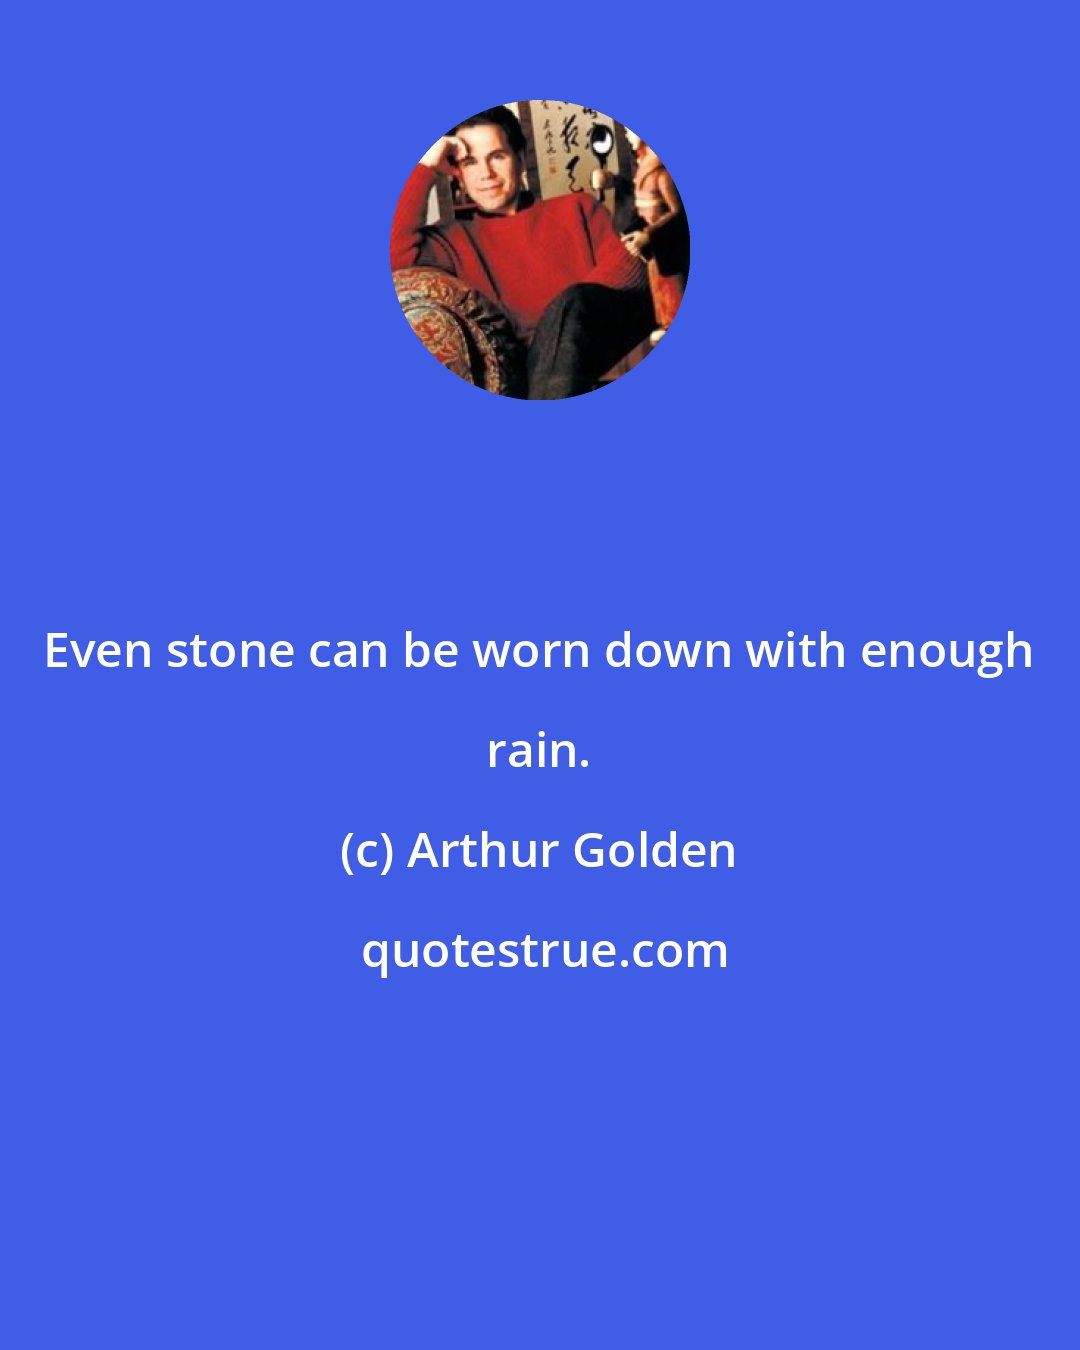 Arthur Golden: Even stone can be worn down with enough rain.